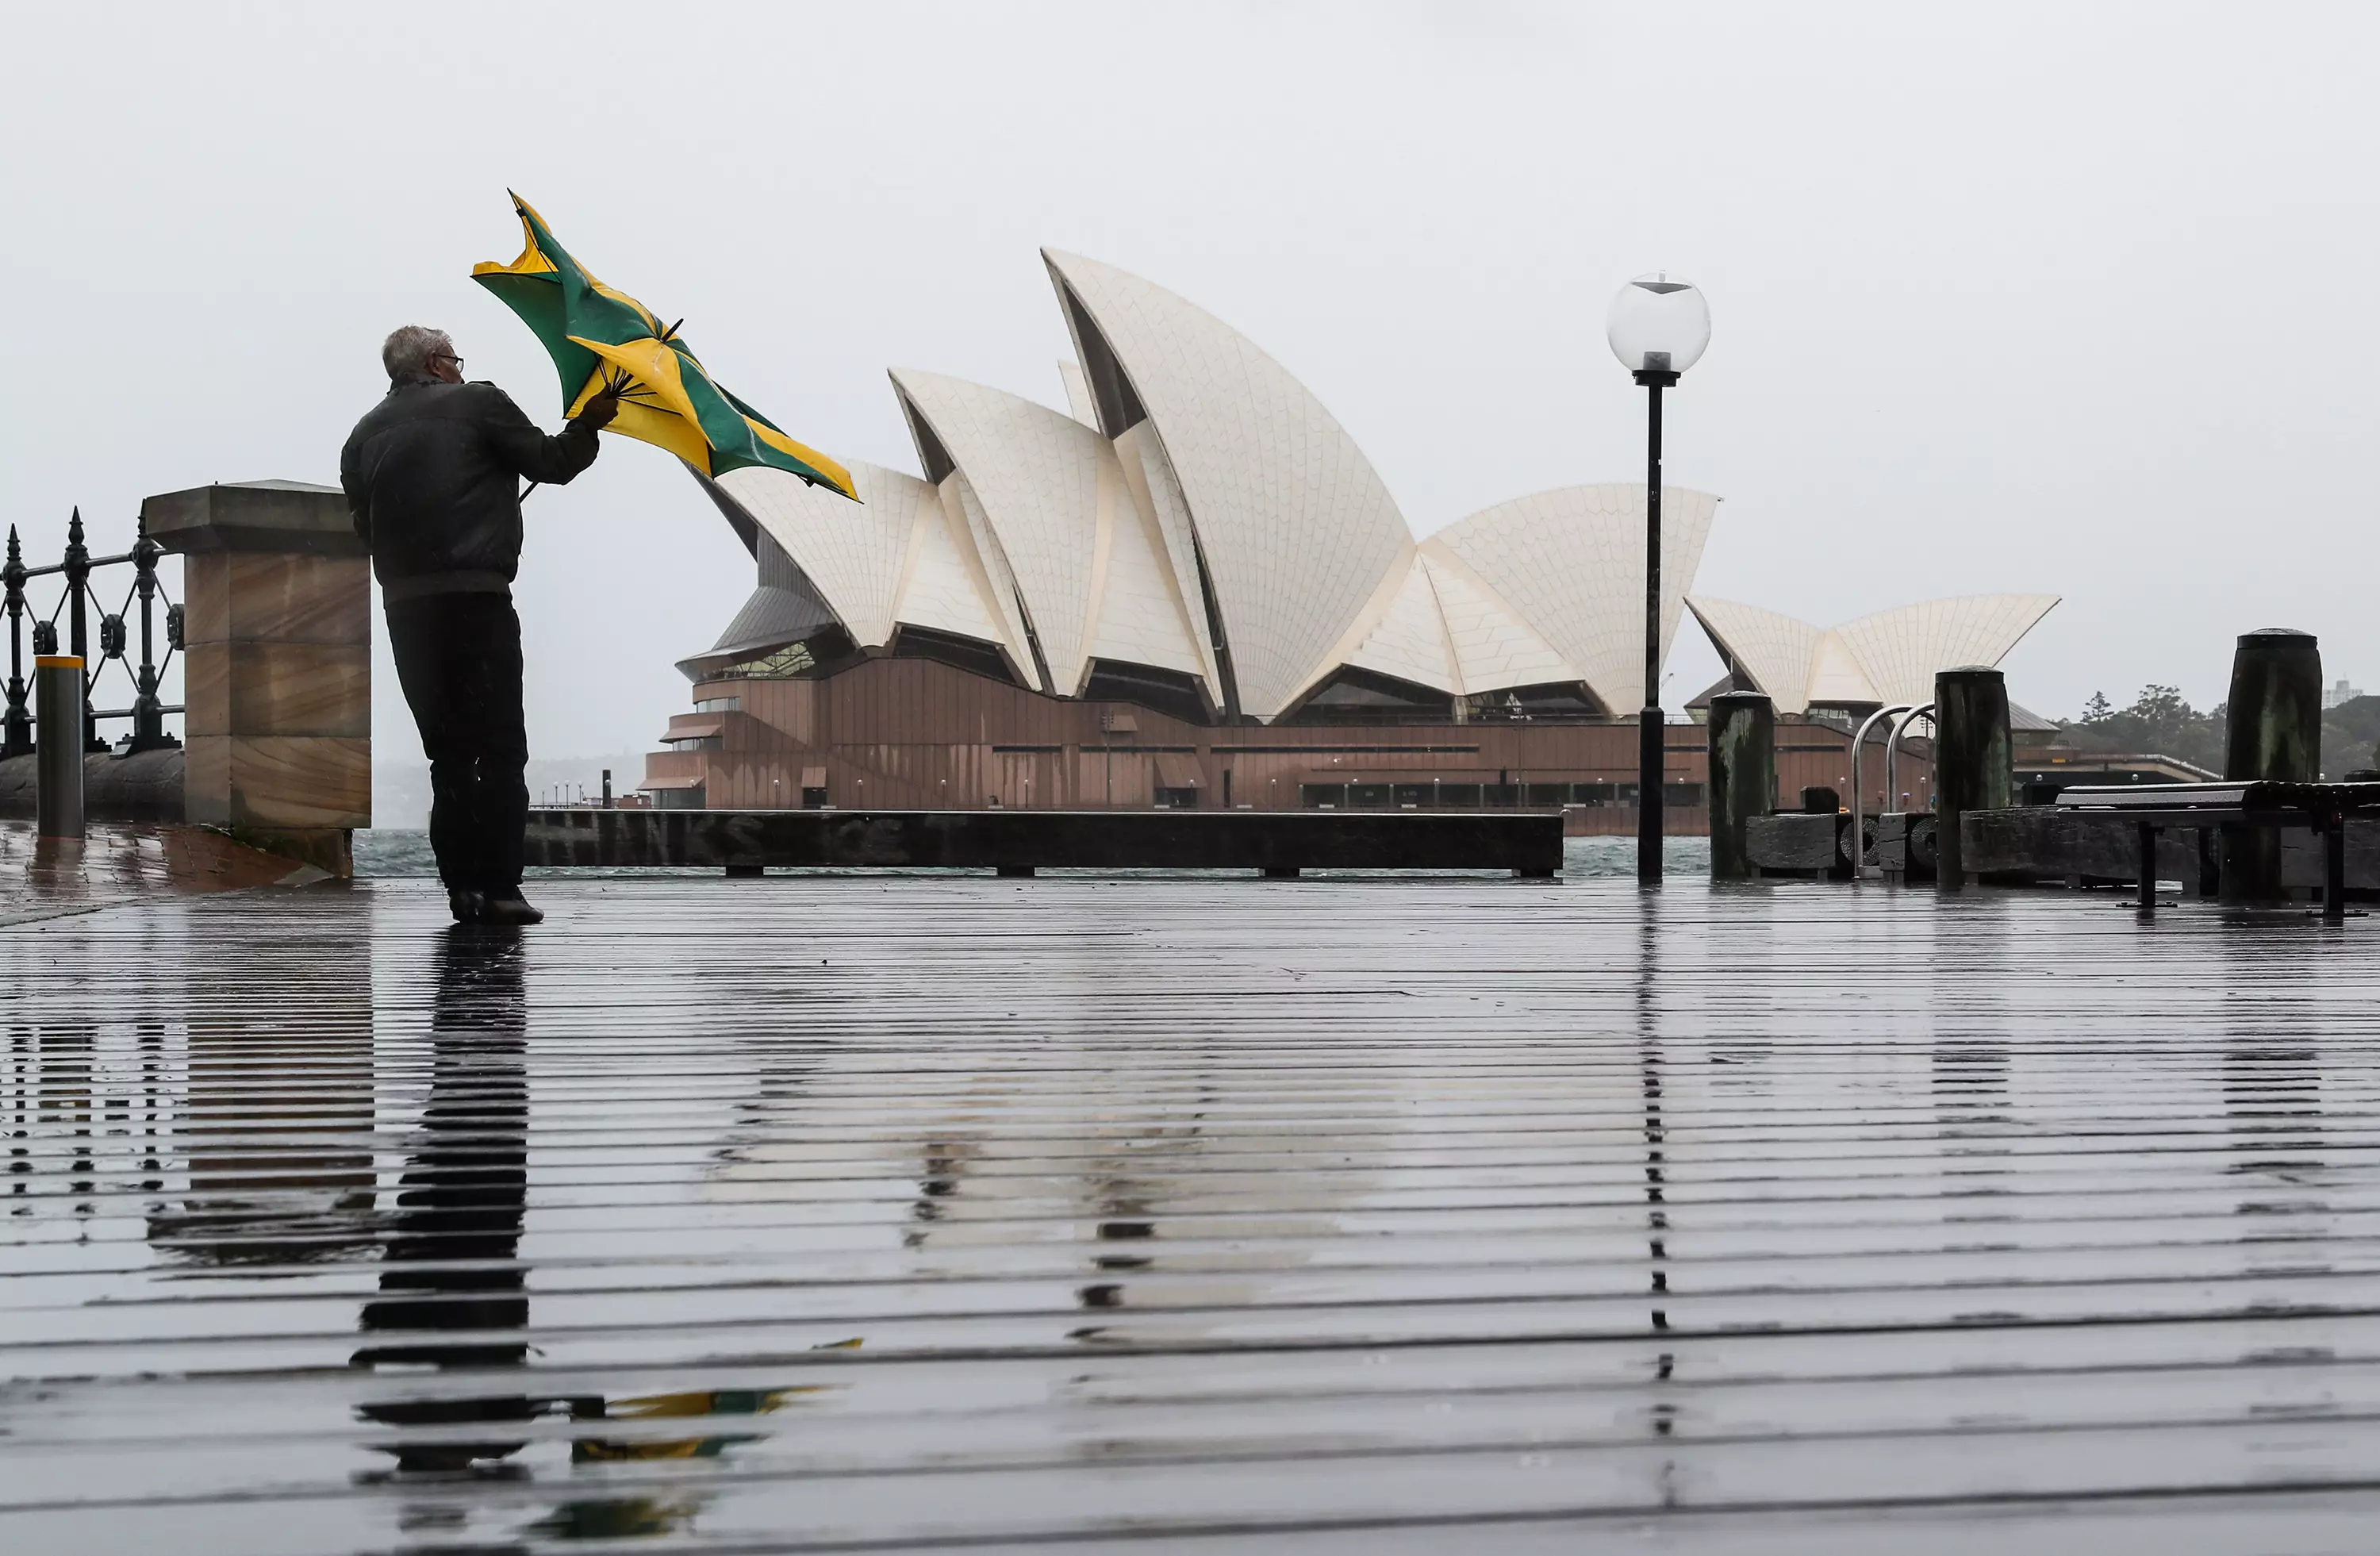 A cold blast is expected to hit the south and east of Australia.